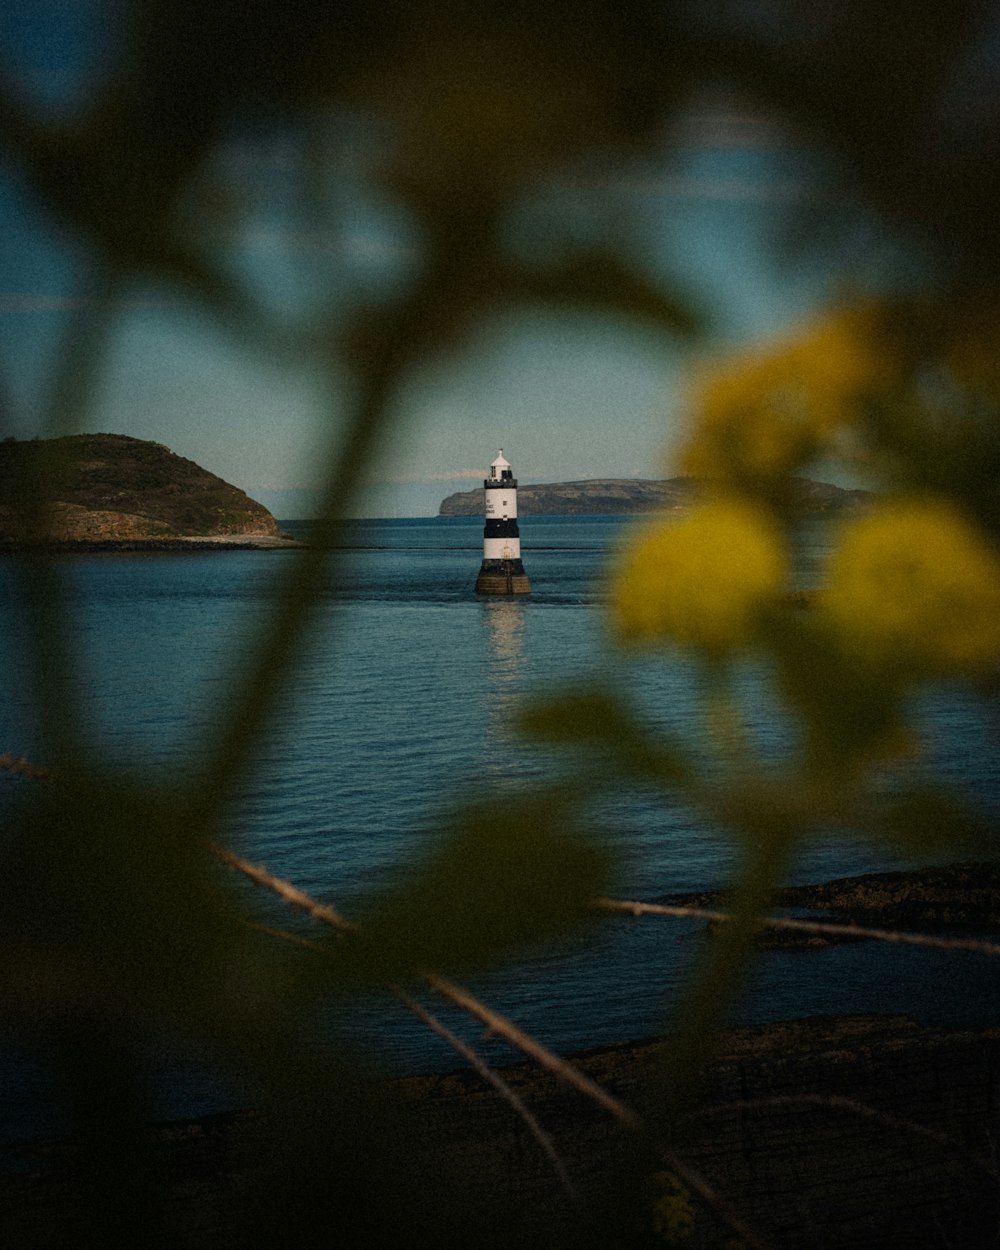 a lighthouse in the middle of a body of water